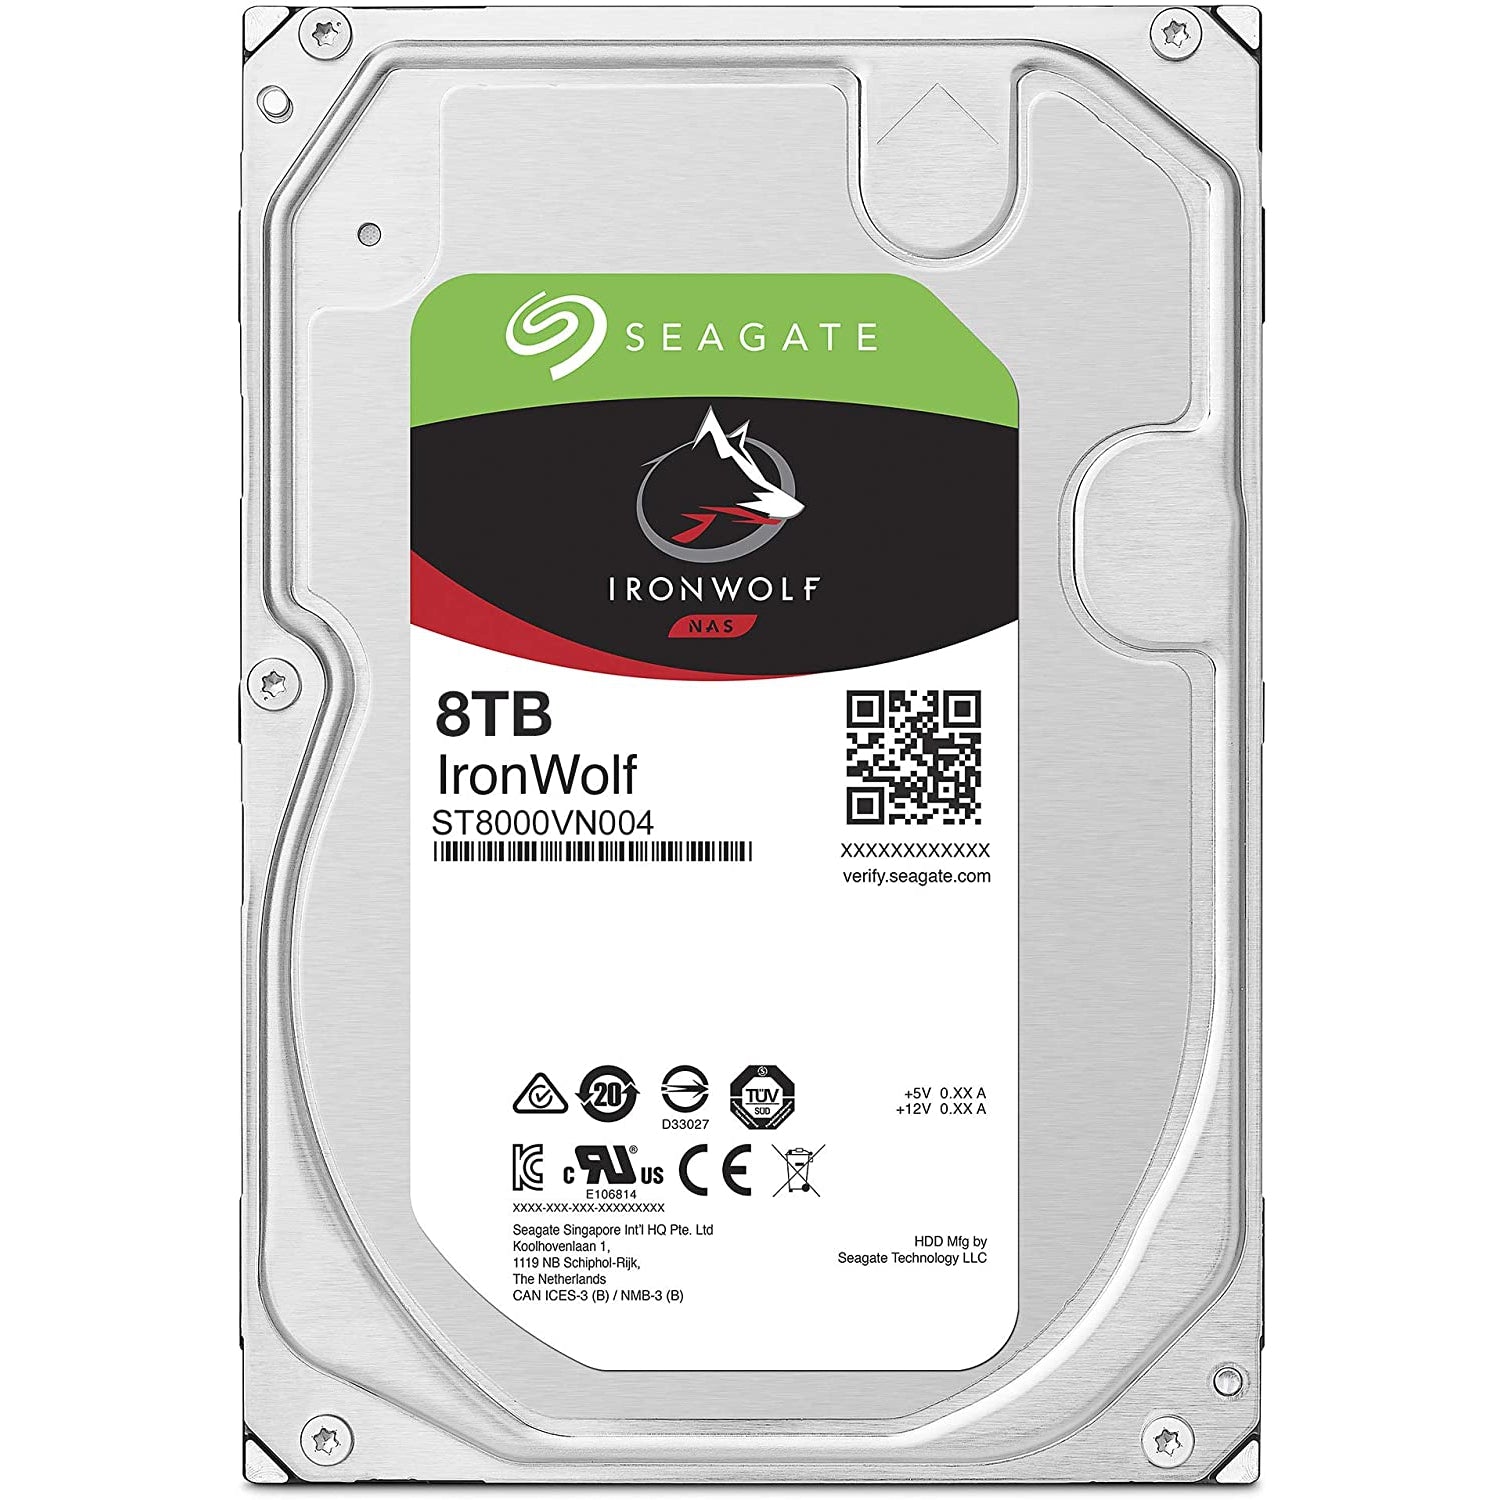 Seagate IronWolf 8TB NAS Internal Hard Drive HDD – 3.5 Inch SATA 6Gb/s 7200 RPM 256MB Cache for RAID Network Attached Storage